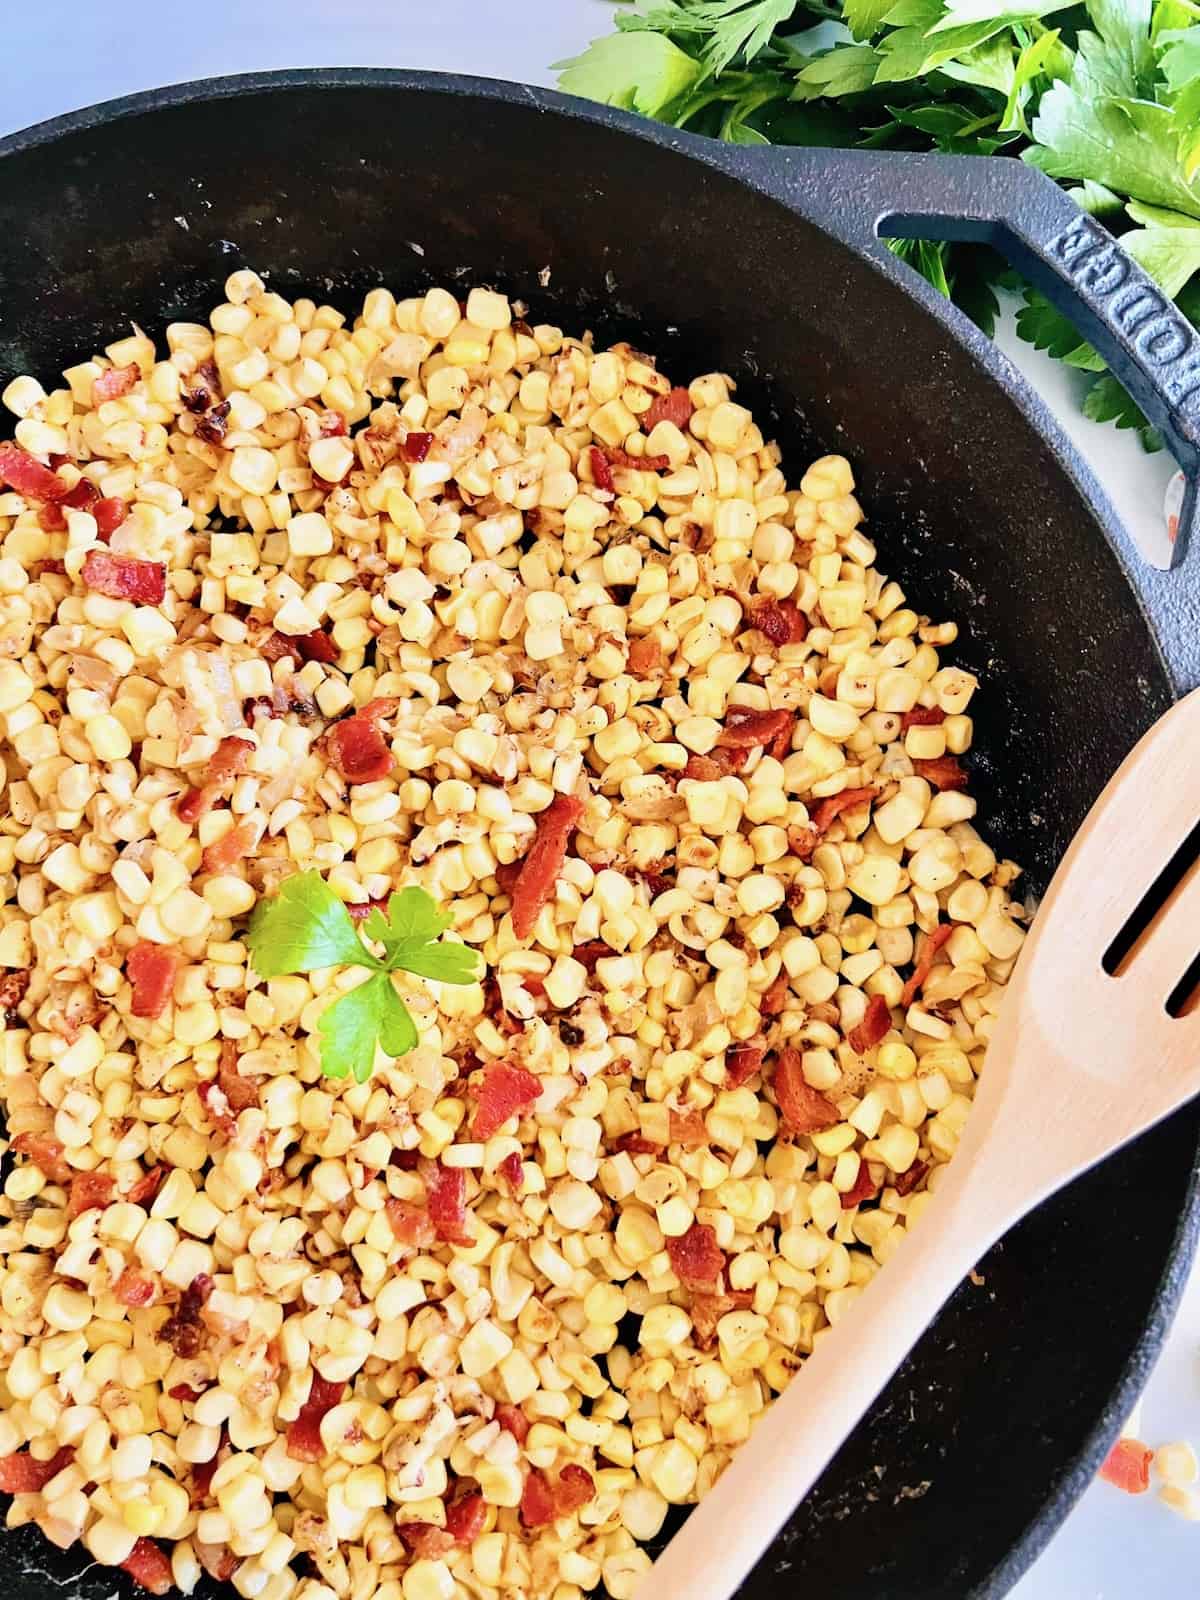 Bacon Fried Corn Cast Iron skillet for traditional Southern homemade recipe.